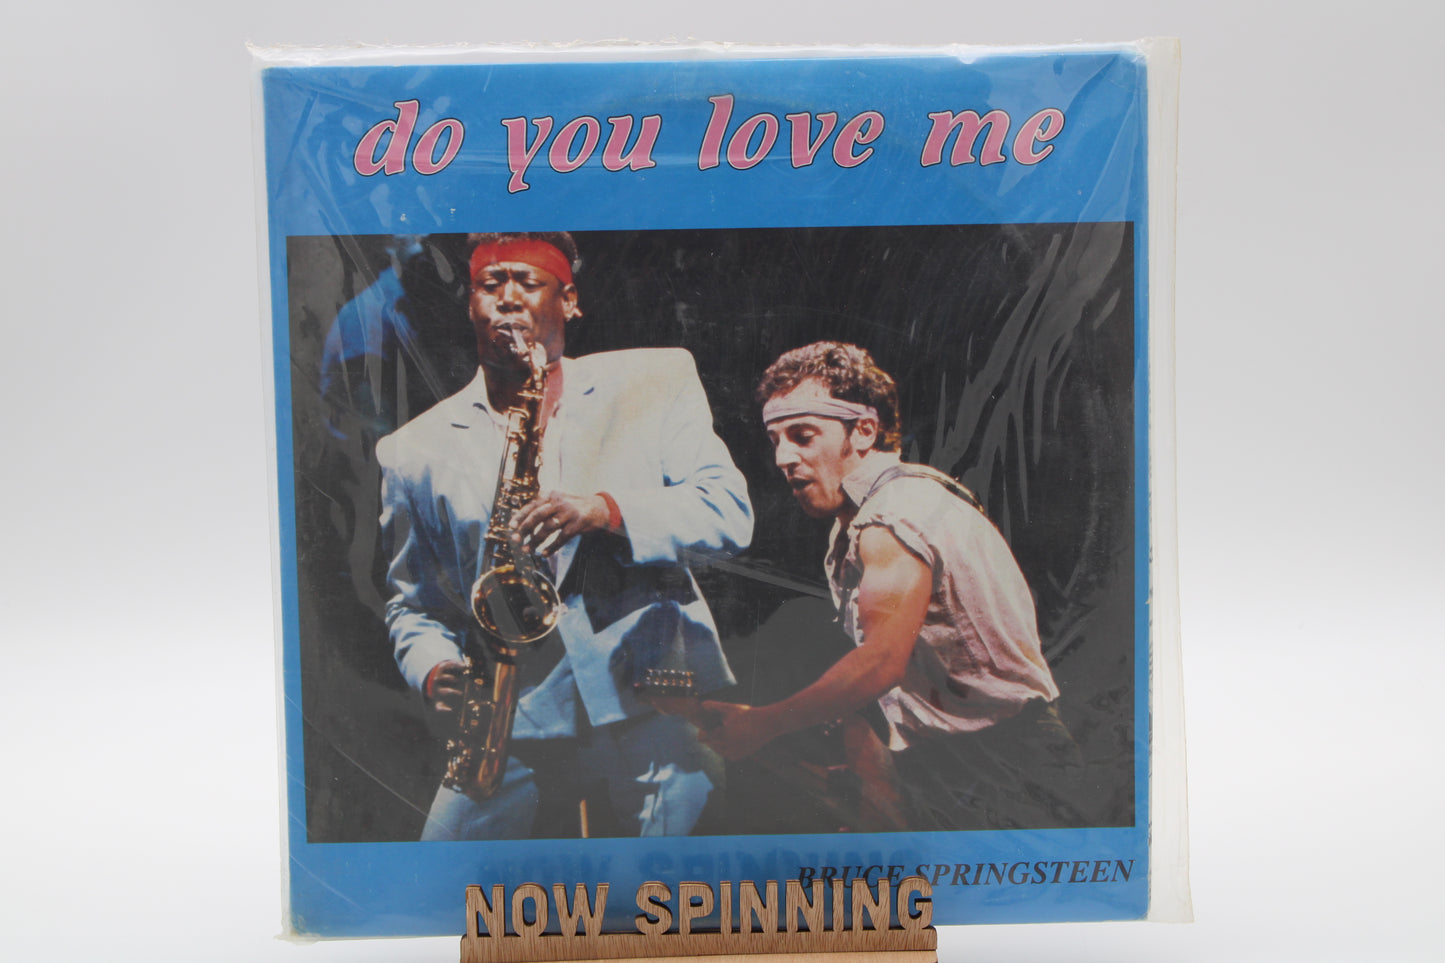 Bruce Springsteen - SEALED "Do You Love Me" 4LPs Unofficial Vinyl - 1984 Live  East Rutherford, NJ 8/16/84